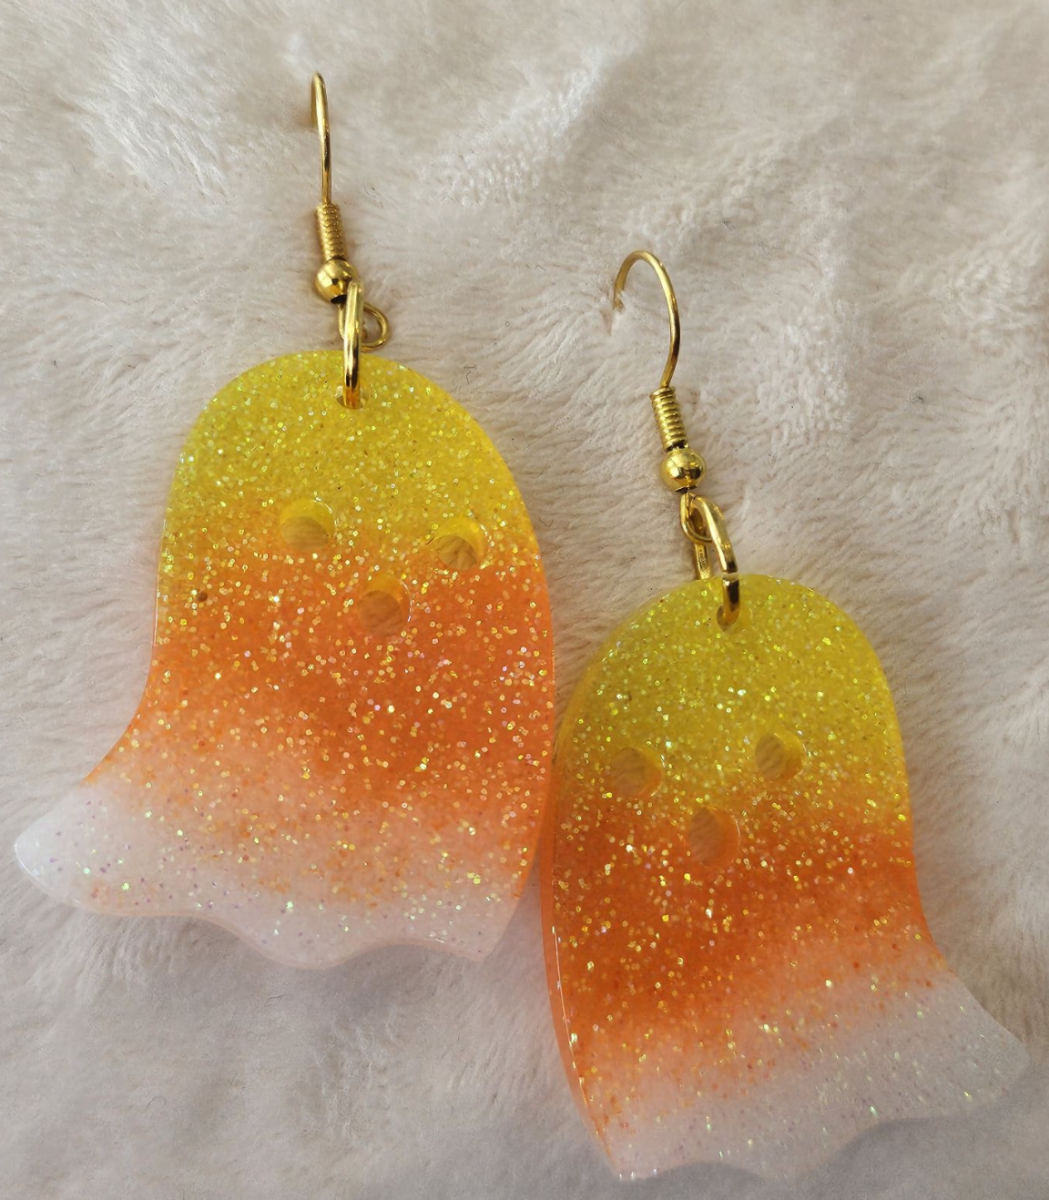 An+example+of+Brent%E2%80%99s+resin+earrings.+They+made+this+for+Halloween.+%28Photo+by+K.+Brent%29